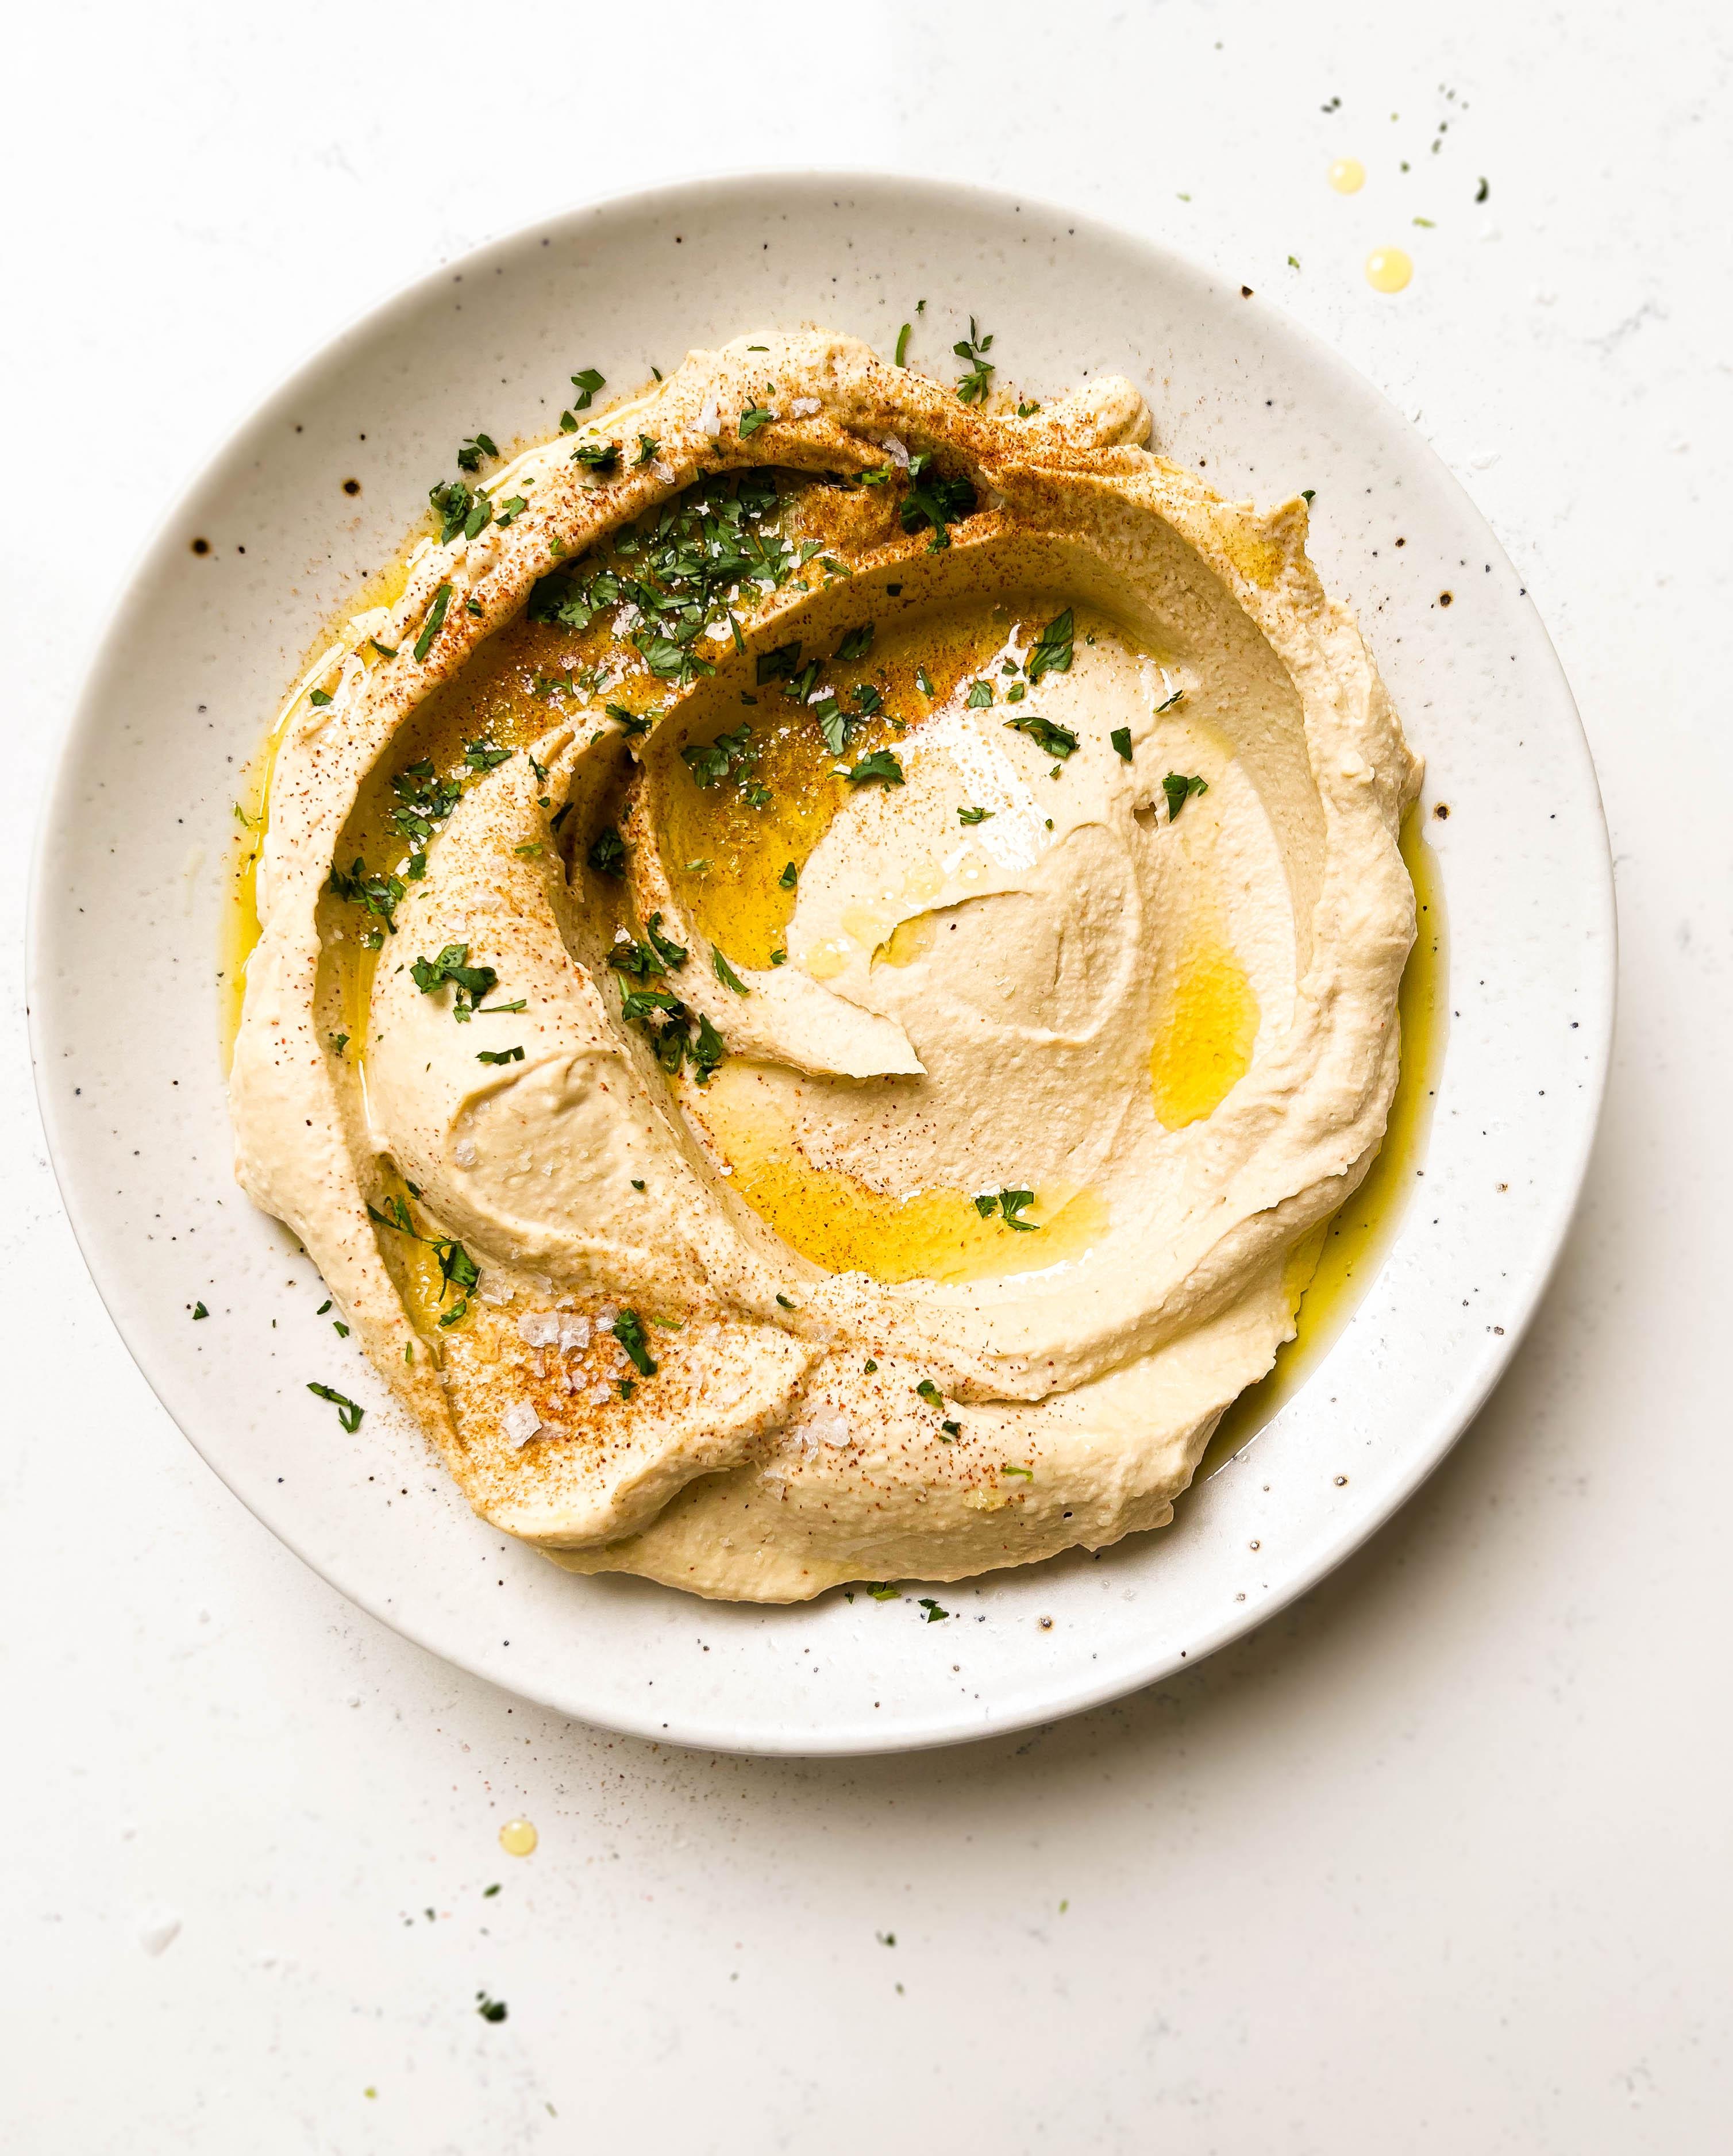 homemade hummus on a speckled plate